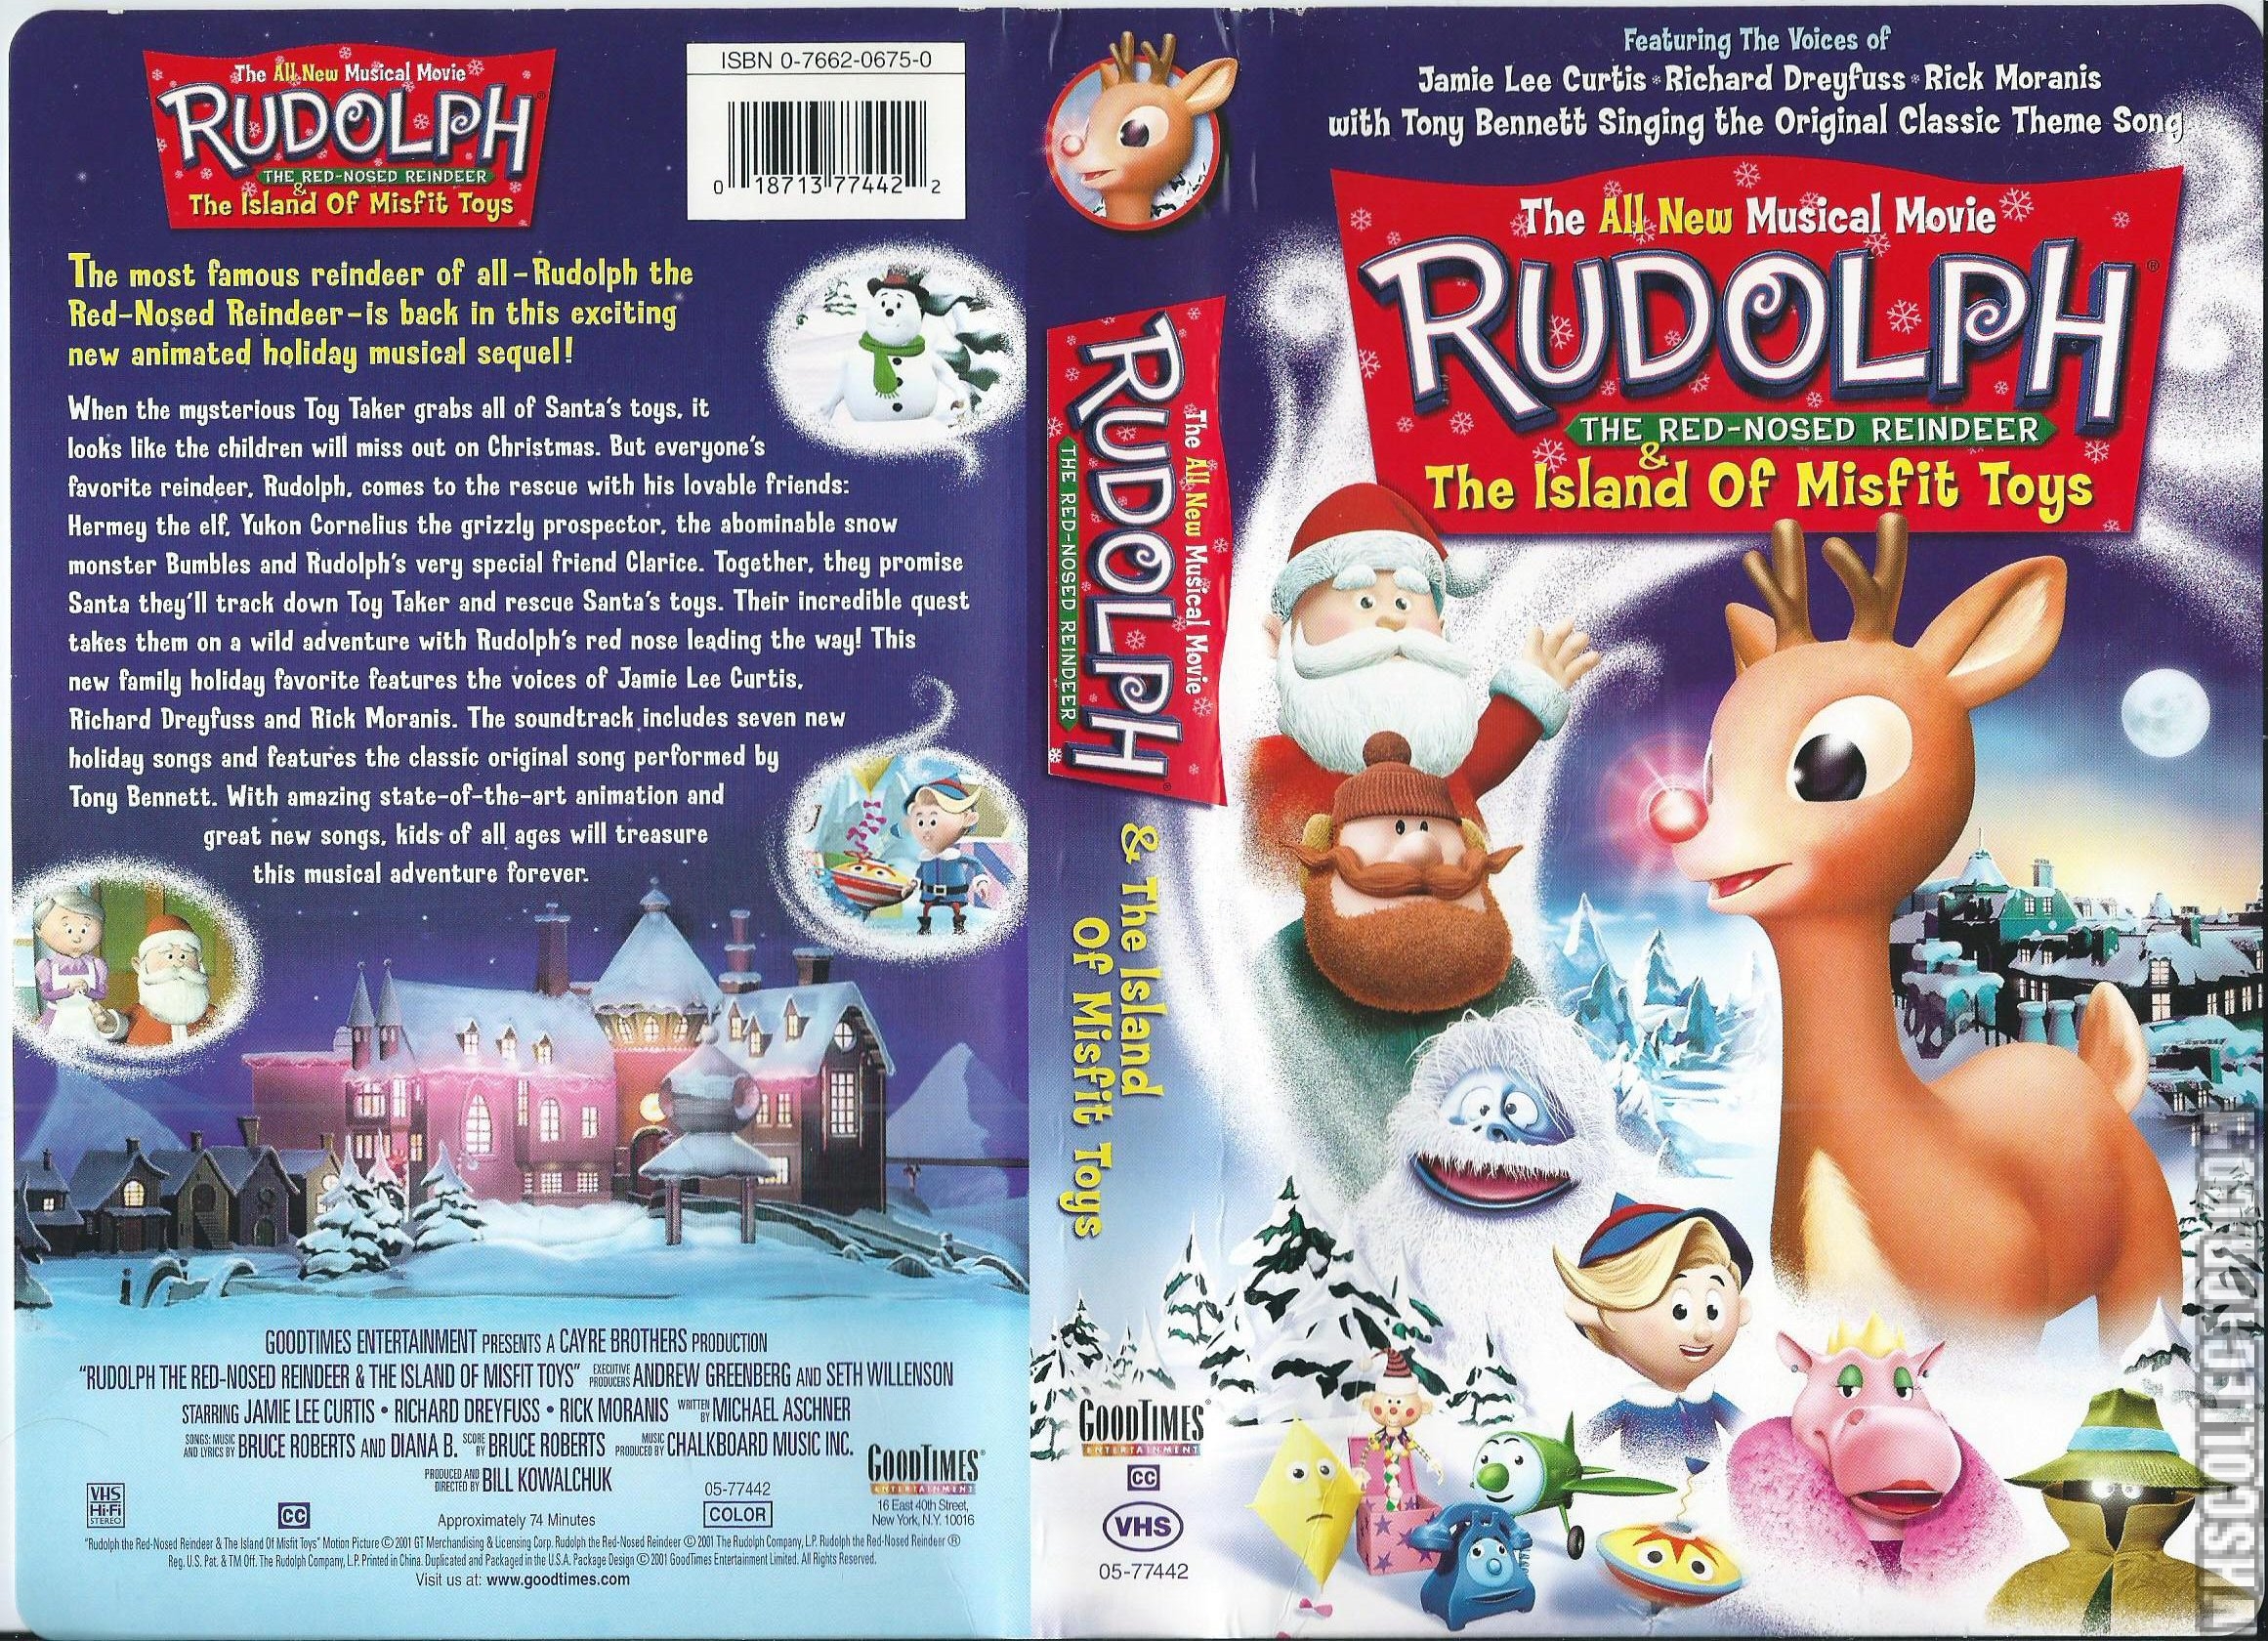 Rudolph the Red-Nosed Reindeer u0026 the Rudolph The Red-Nosed...